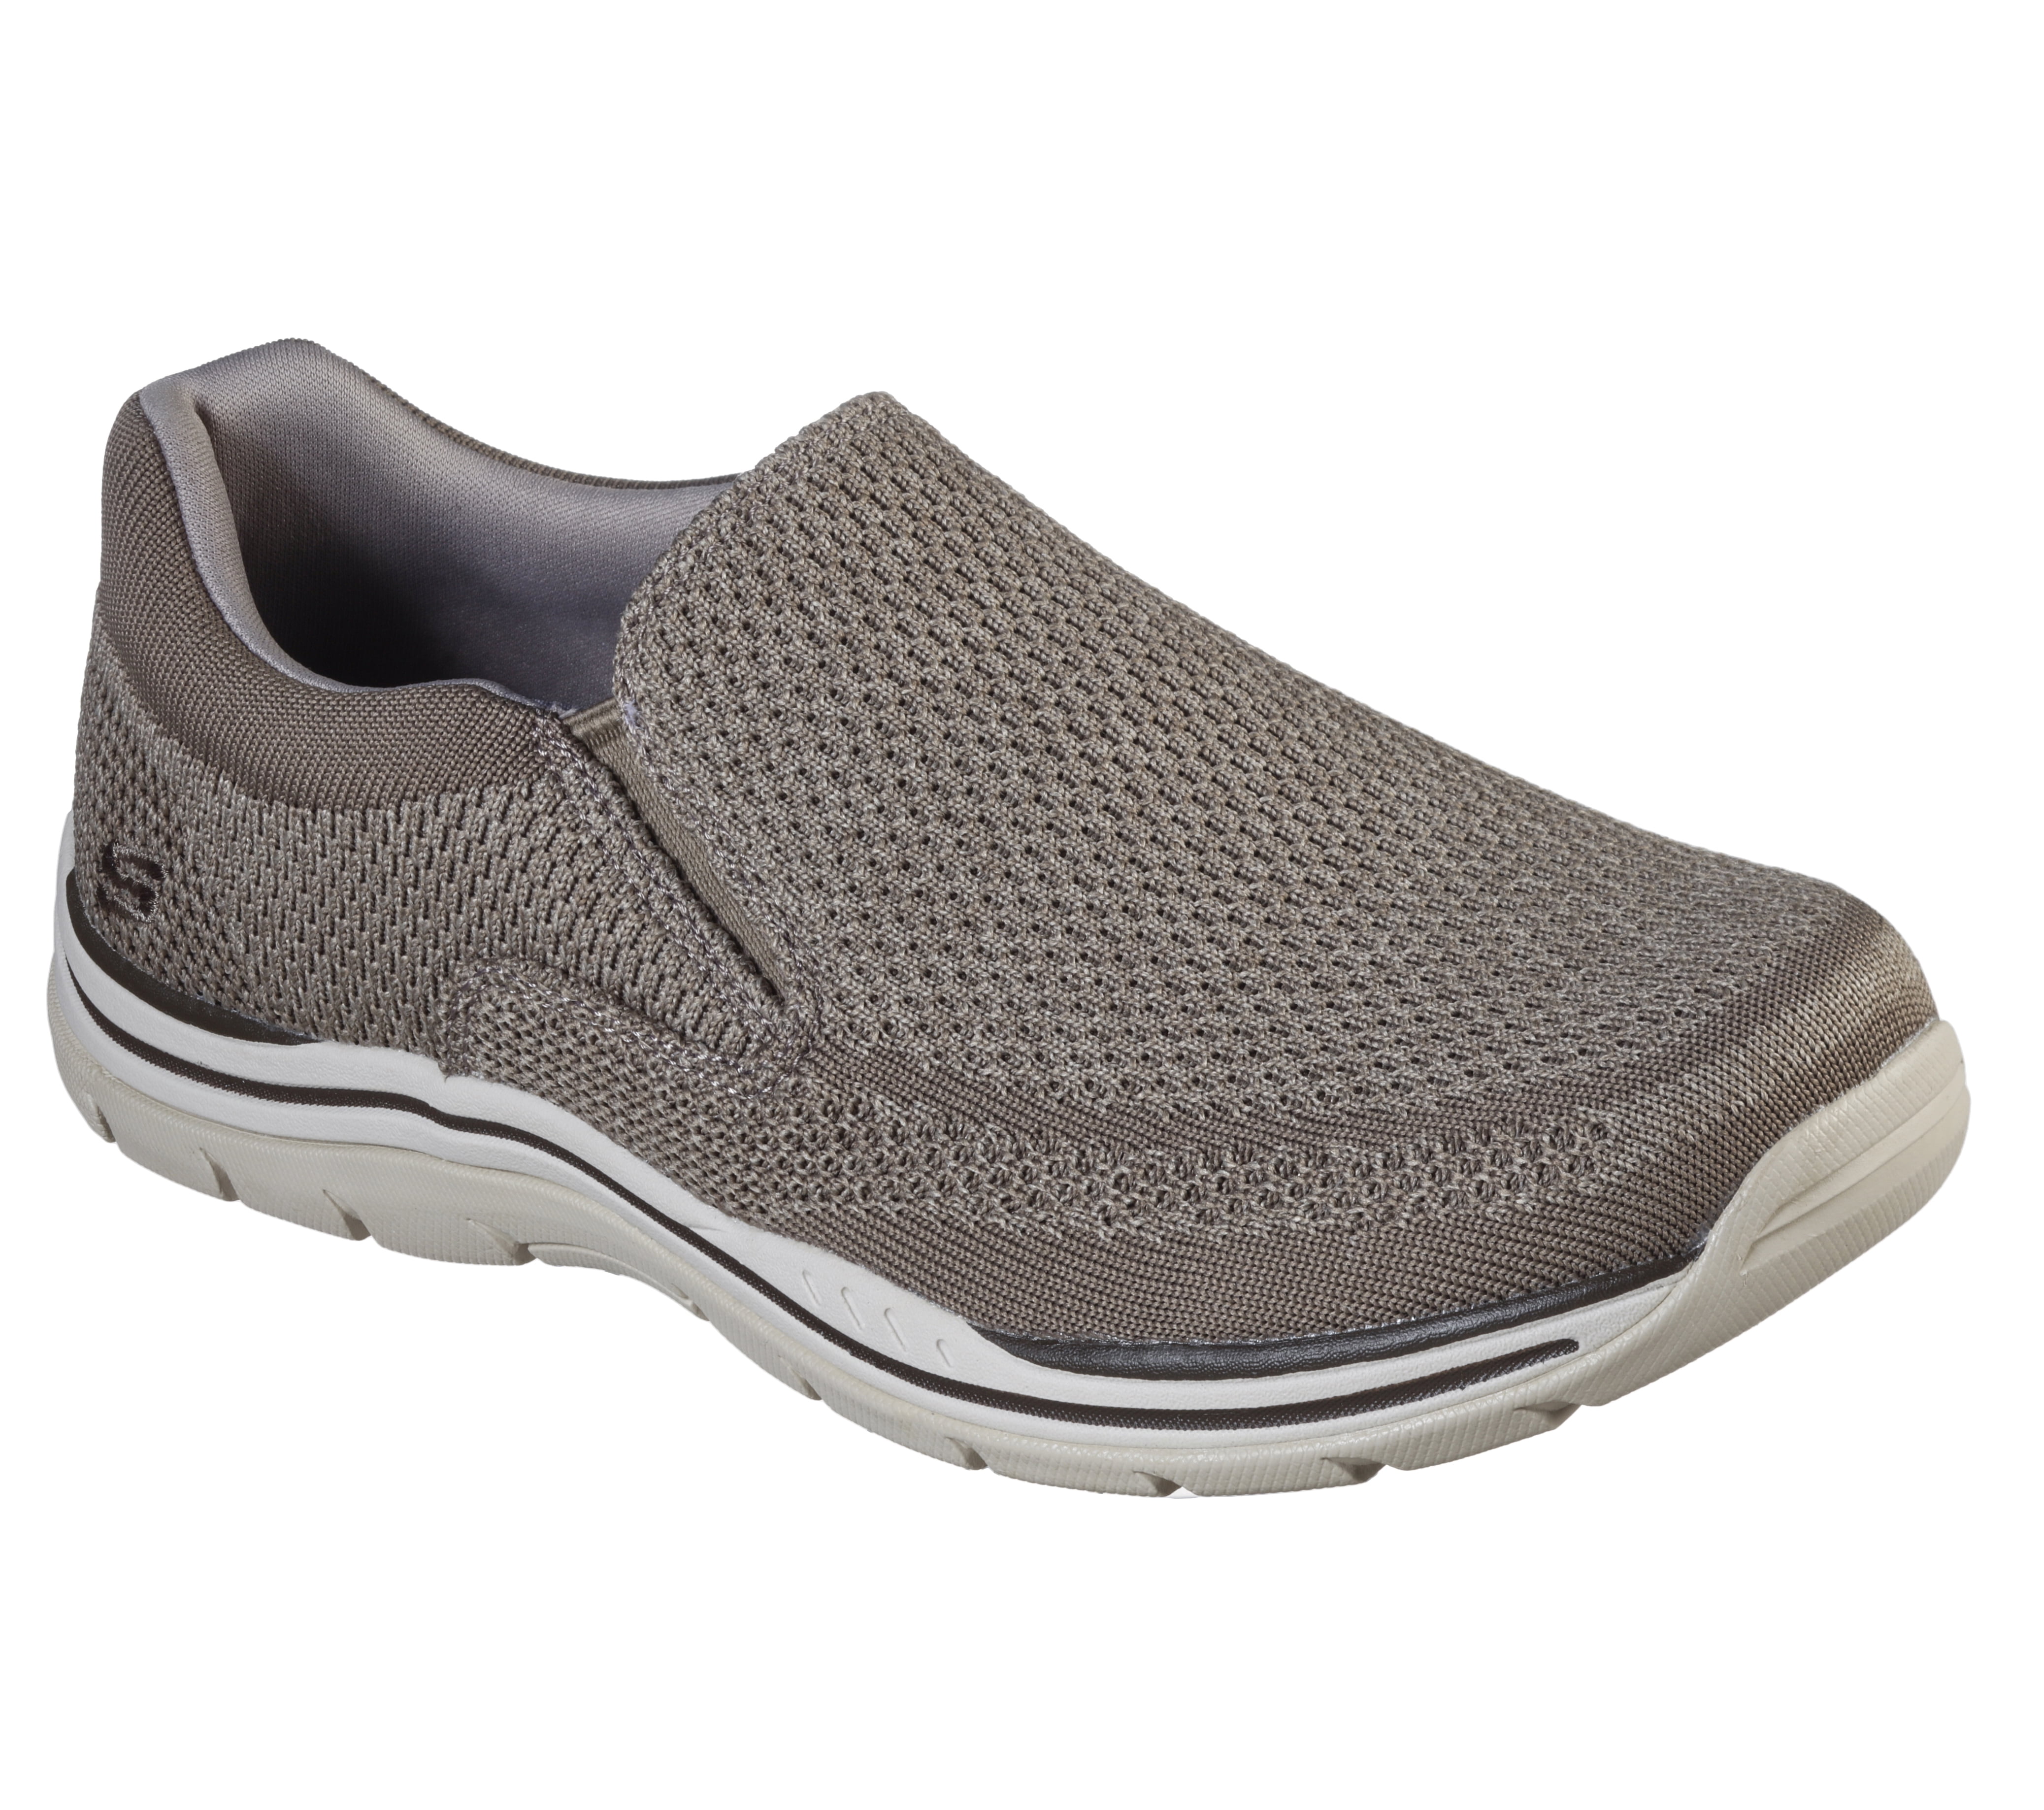 Skechers Men's Relaxed Fit Expected Gomel Casual Slip-on Sneaker (Wide ...